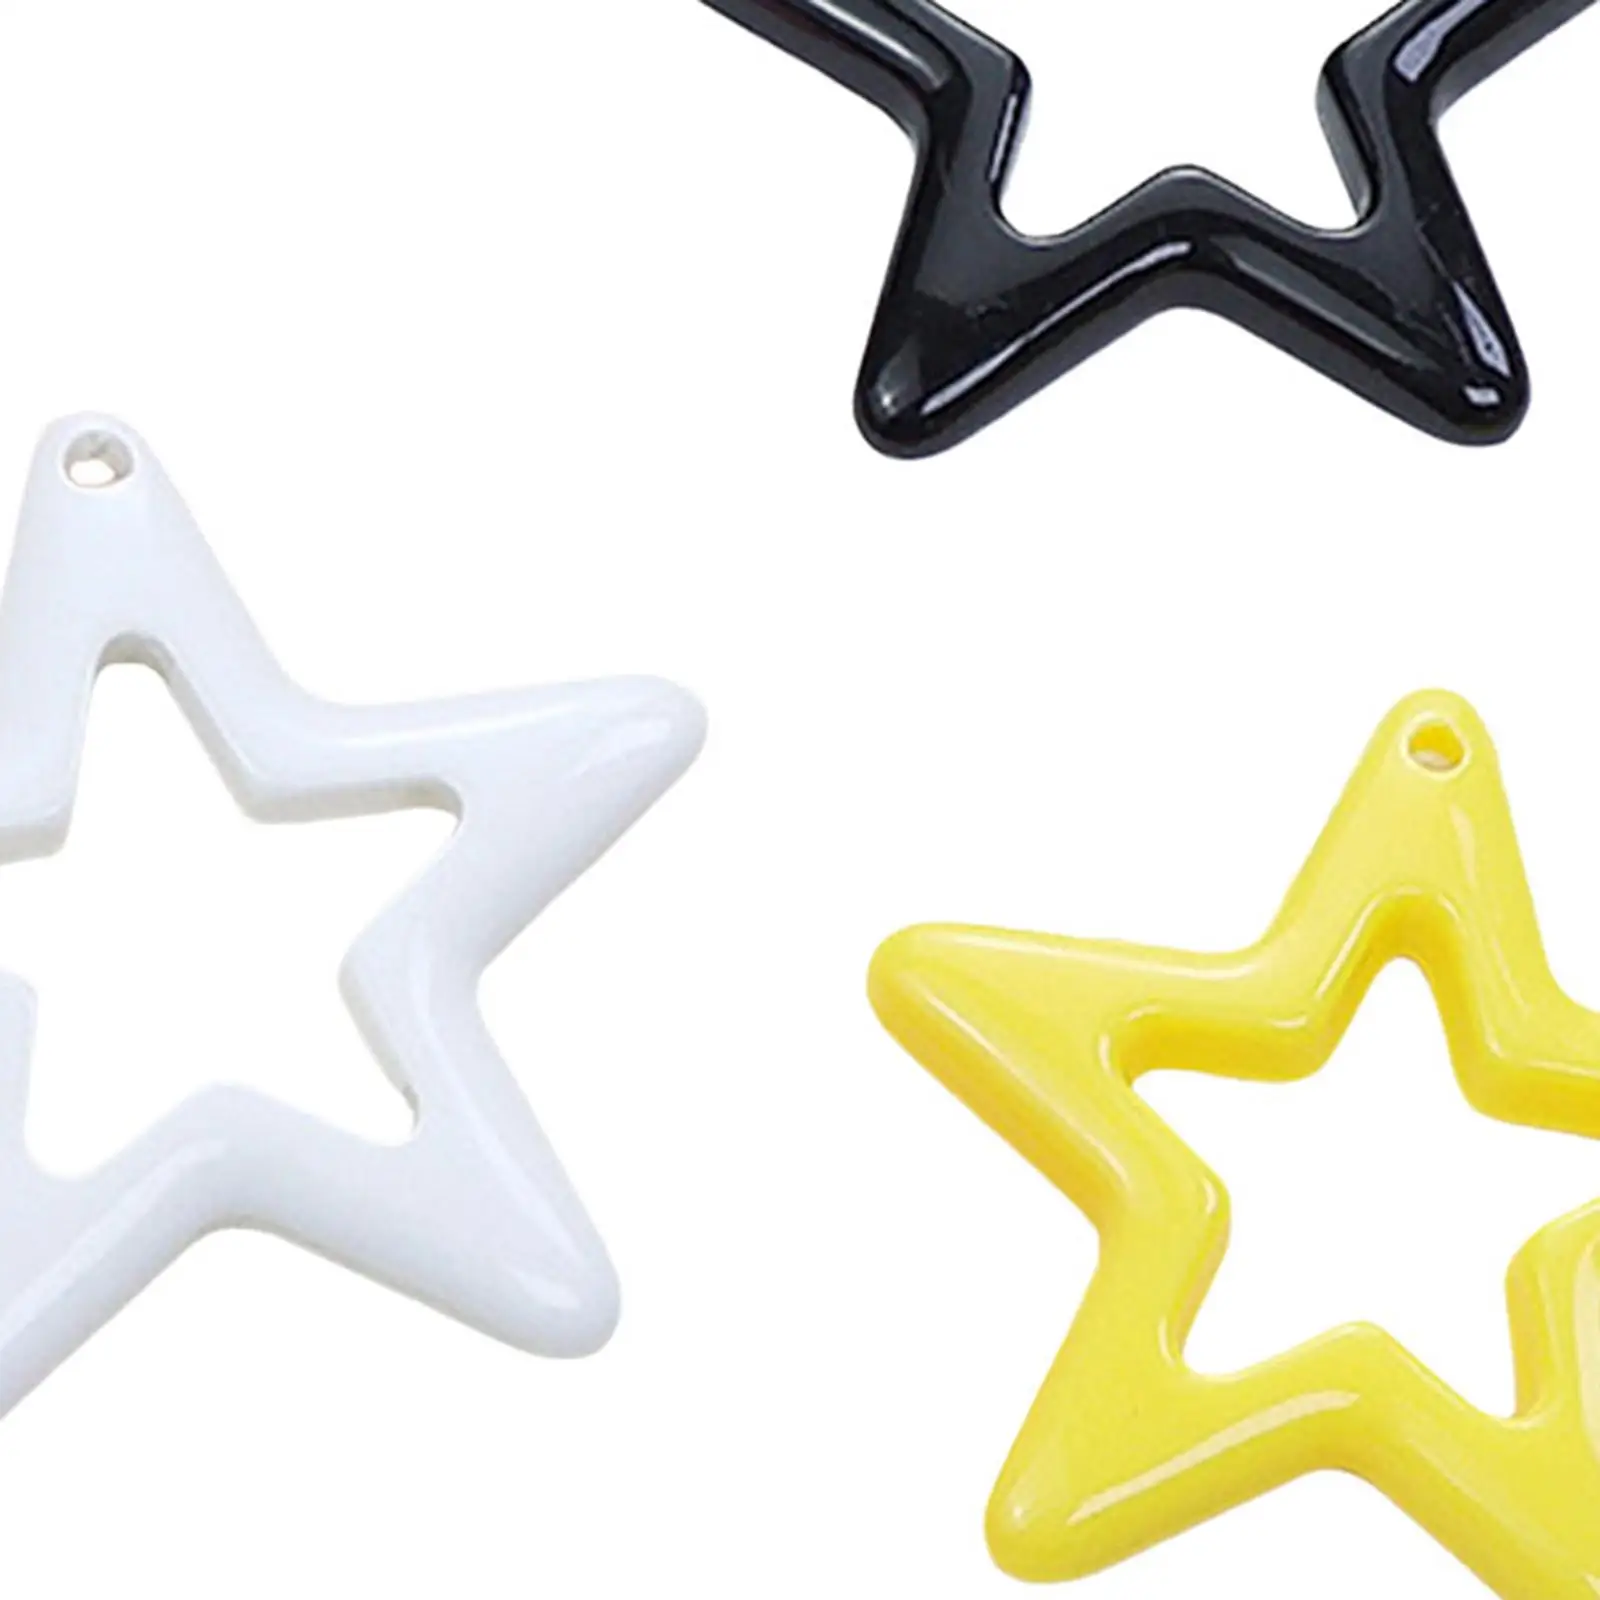 Hollow Star Spacer Bead Hollow Pentagrams Bead Acrylic Hollow Star Bead Statement Jewelry for Necklace Beading Bracelet Earring